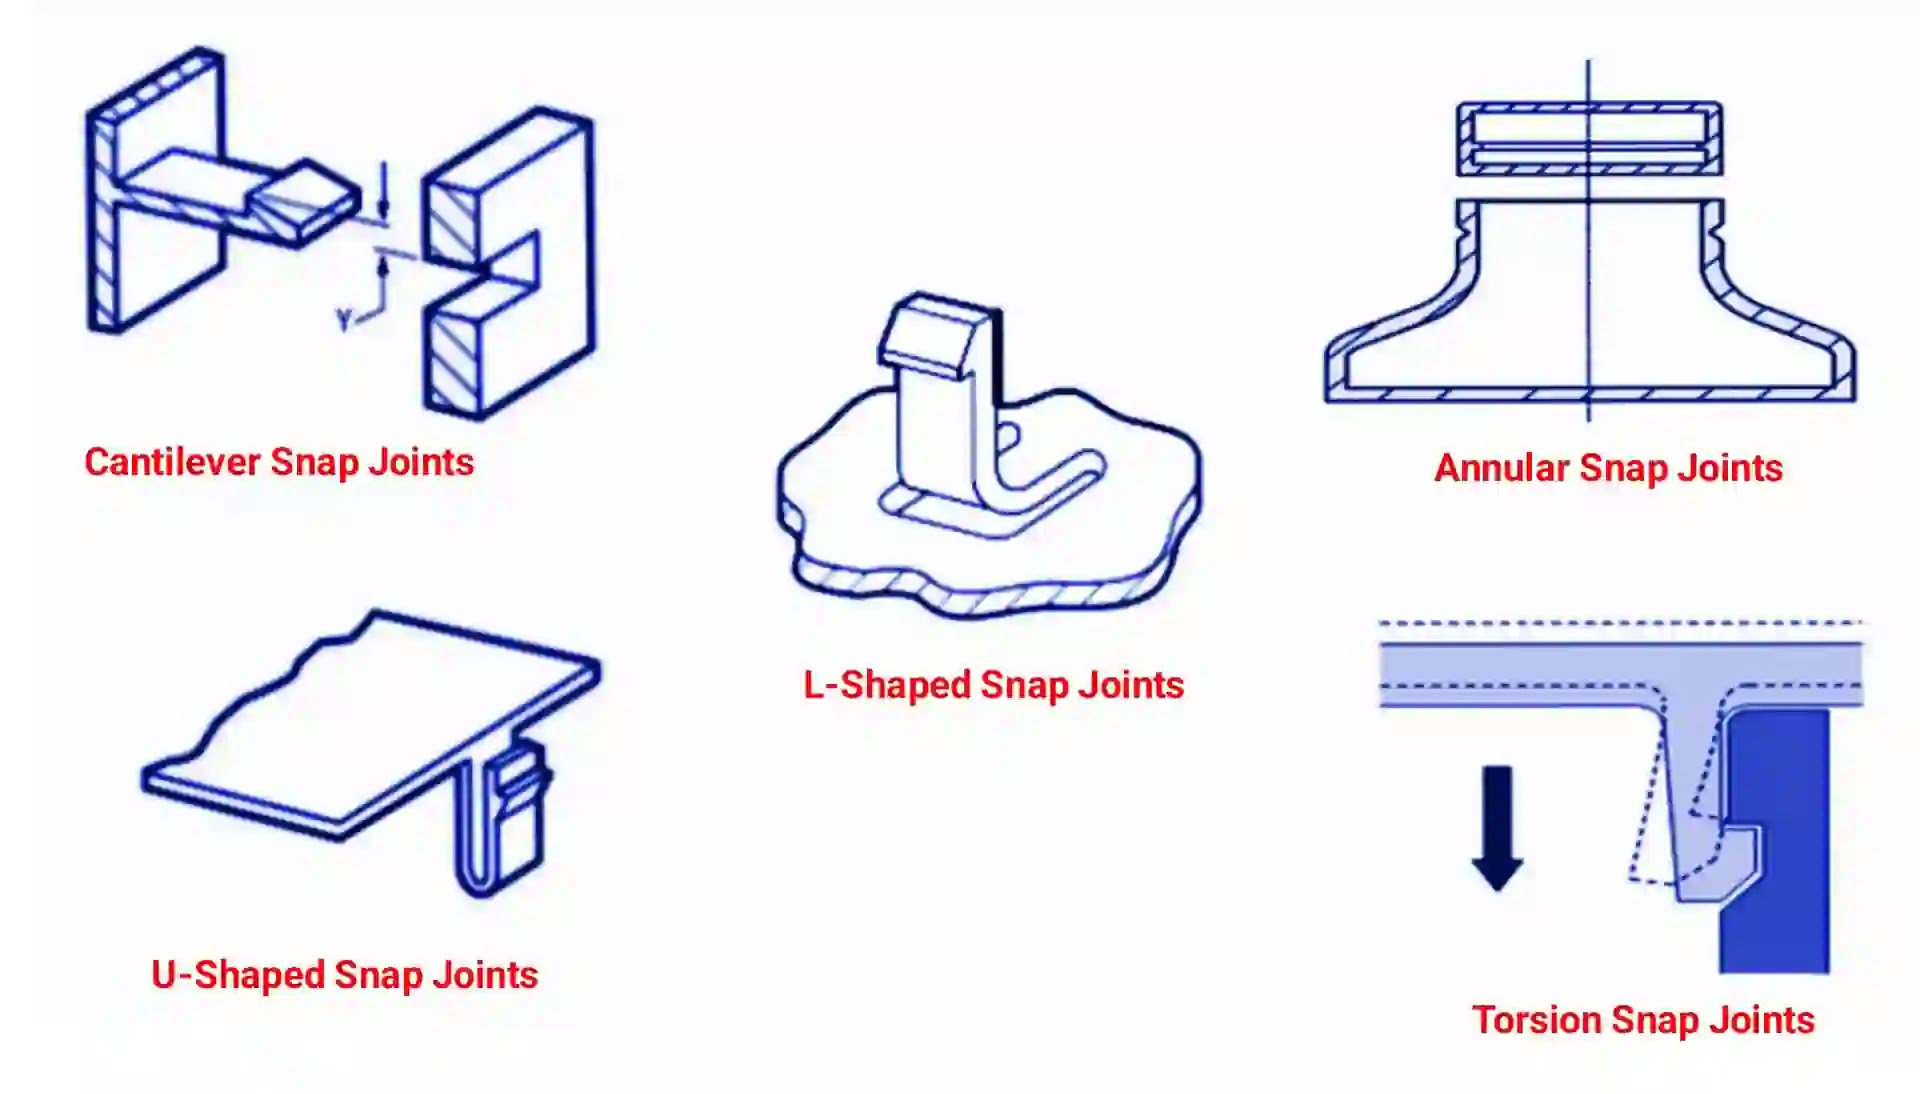 Cantilever Snap Joints: Design Principles and Applications